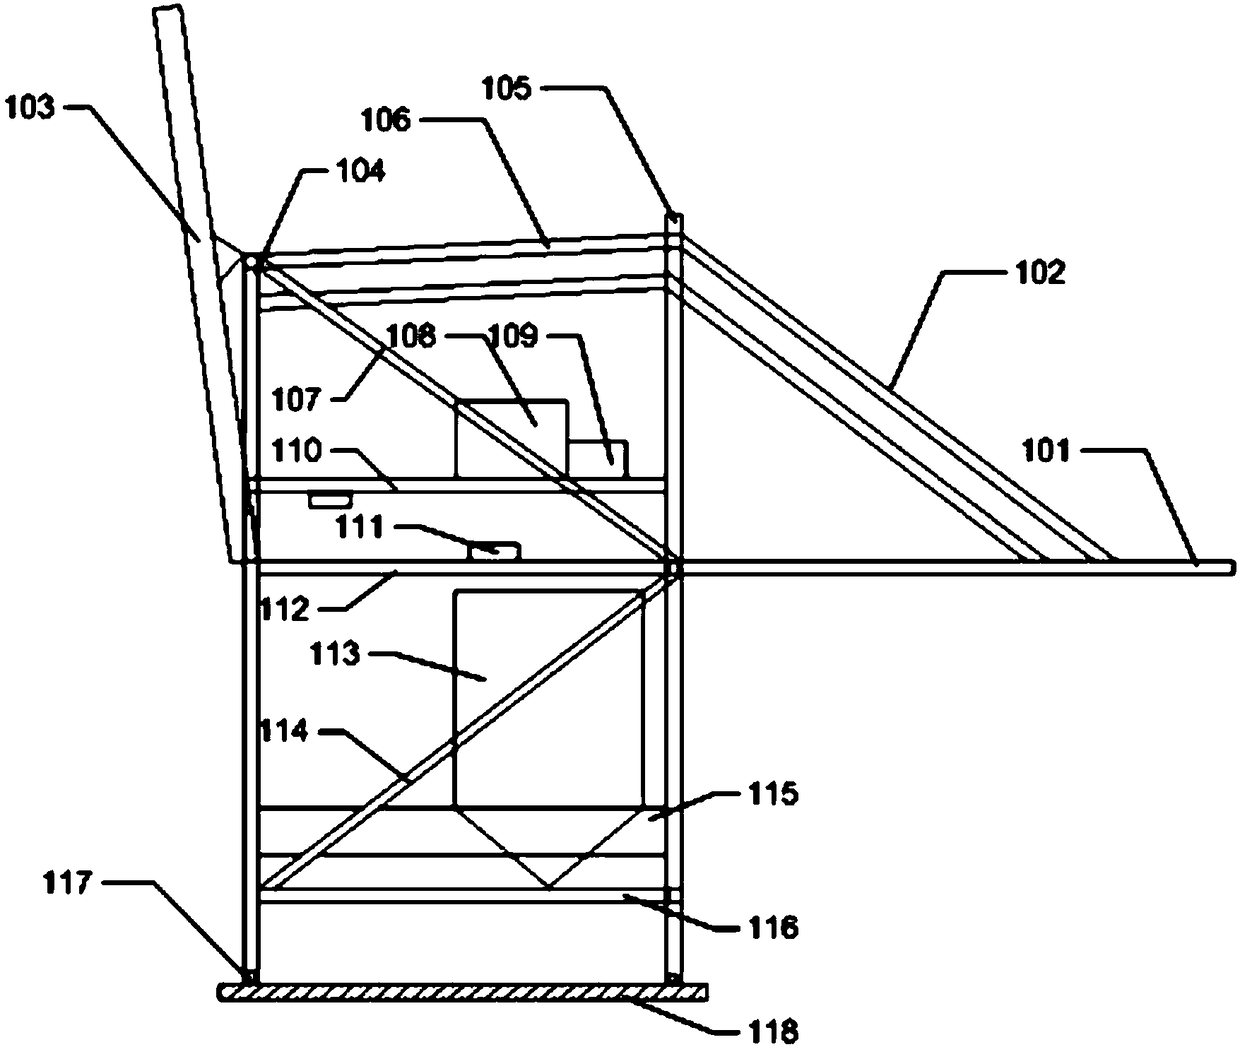 Disassembly construction method for dual-cantilever ship unloader